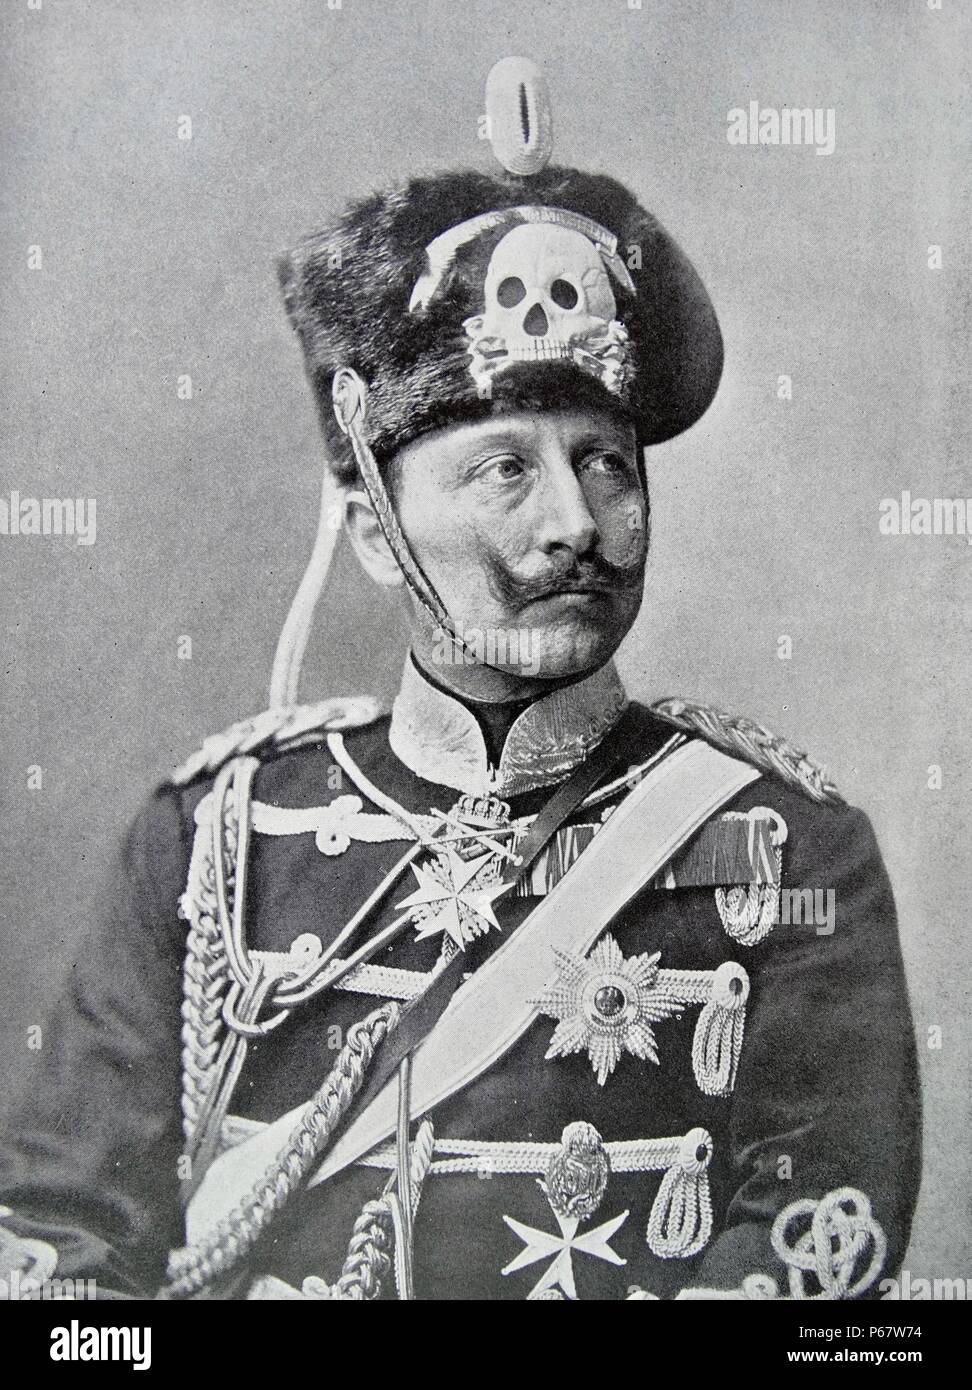 Wilhelm II or William II; 1859 – 4 June 1941) was the last German Emperor (Kaiser) and King of Prussia, ruling the German Empire and the Kingdom of Prussia from 15 June 1888 to 9 November 1918. Stock Photo